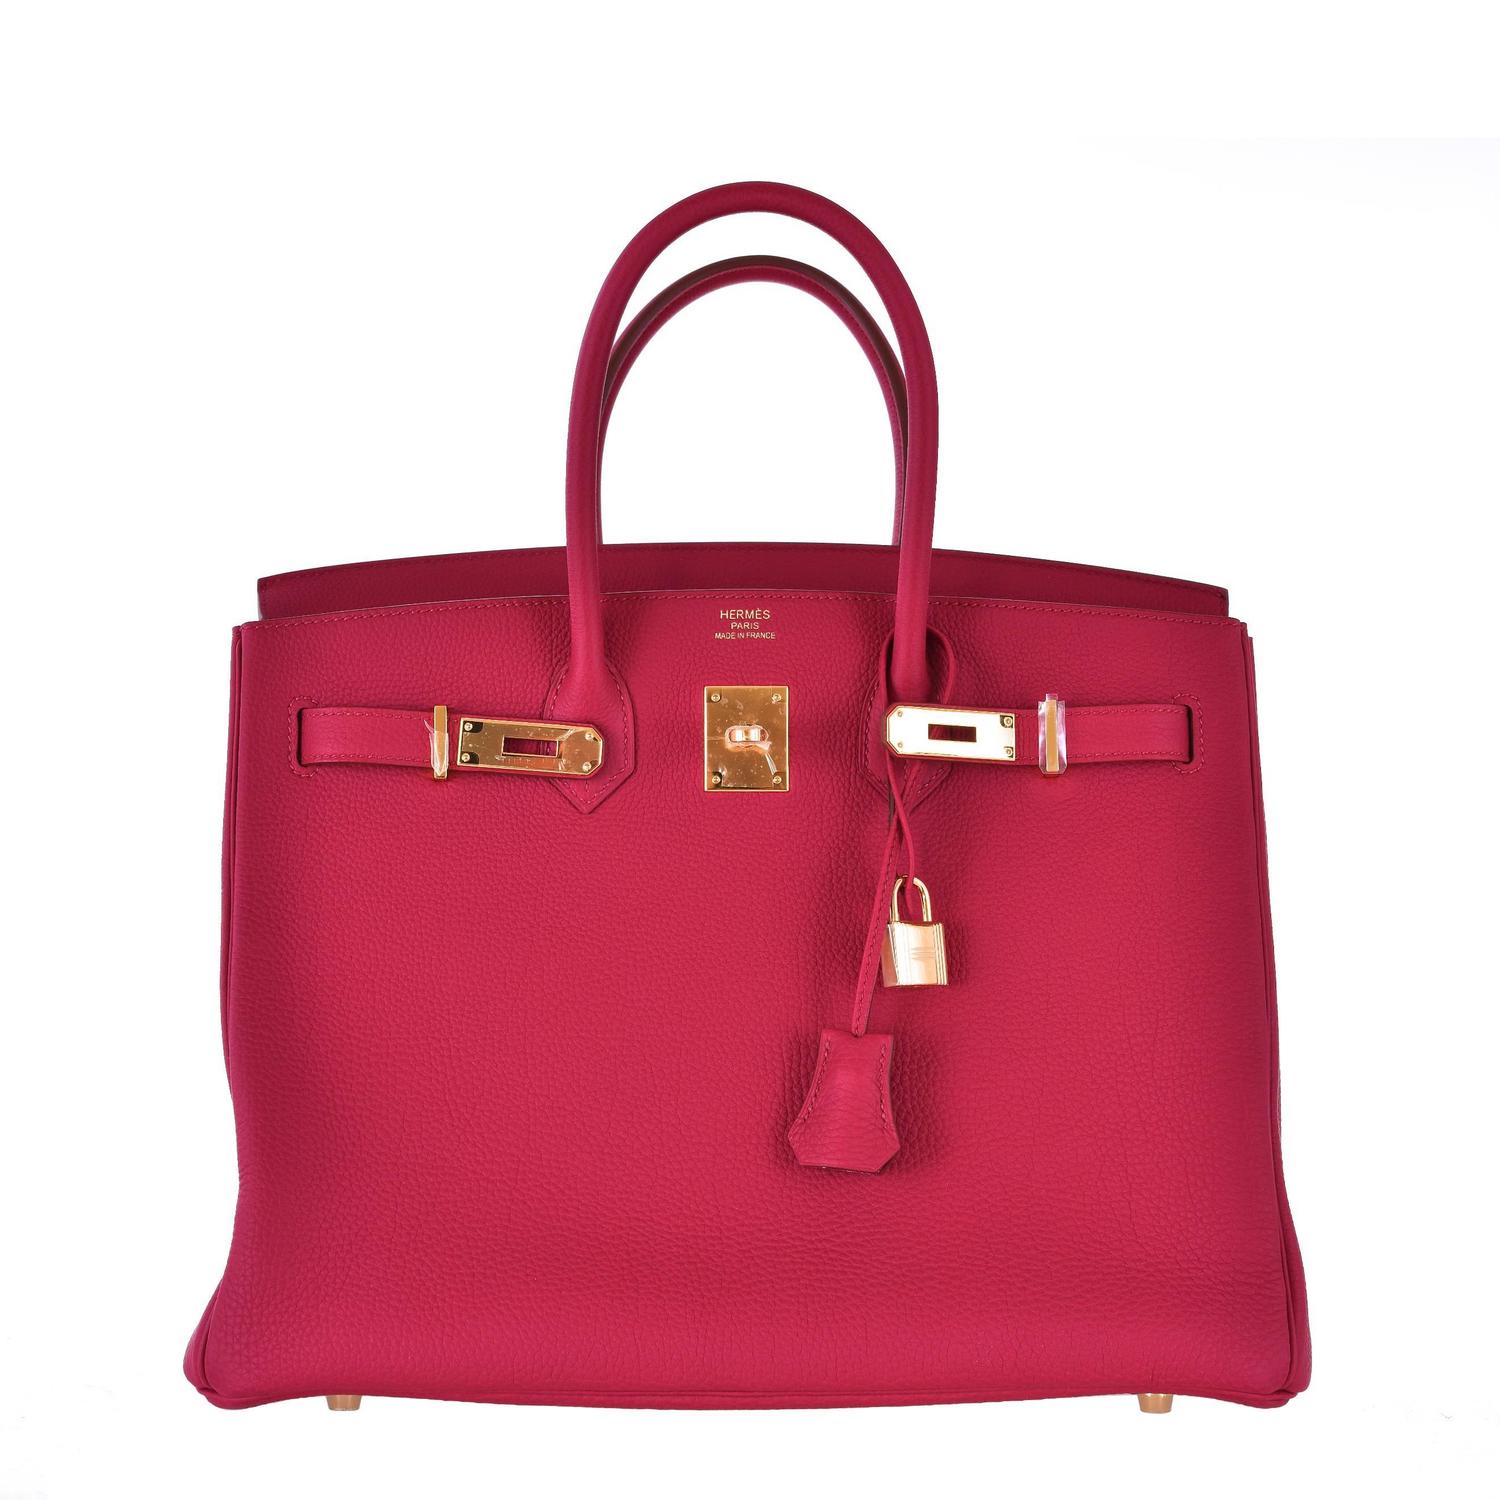 How Much Is A Birkin Bag New | NAR Media Kit